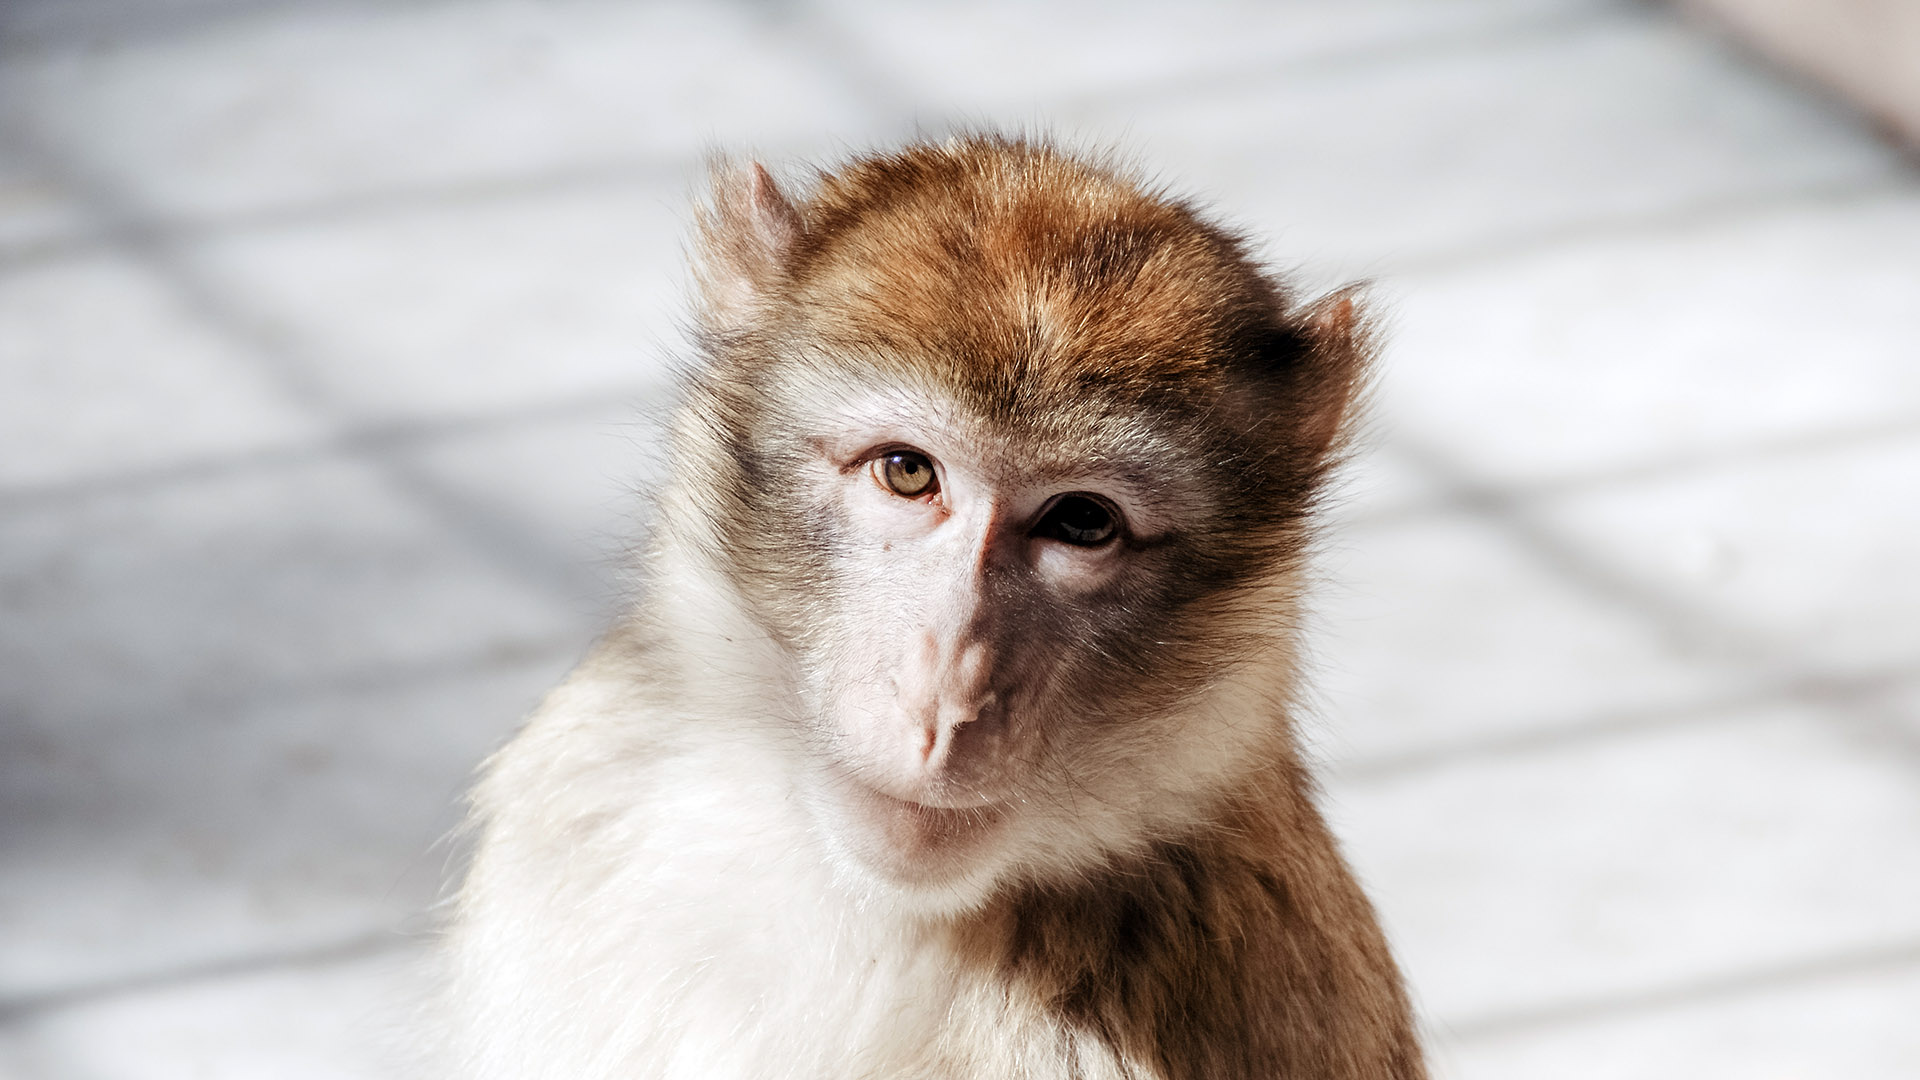 Compelling The Usda To Protect Primates Used In Research Animal Legal Defense Fund